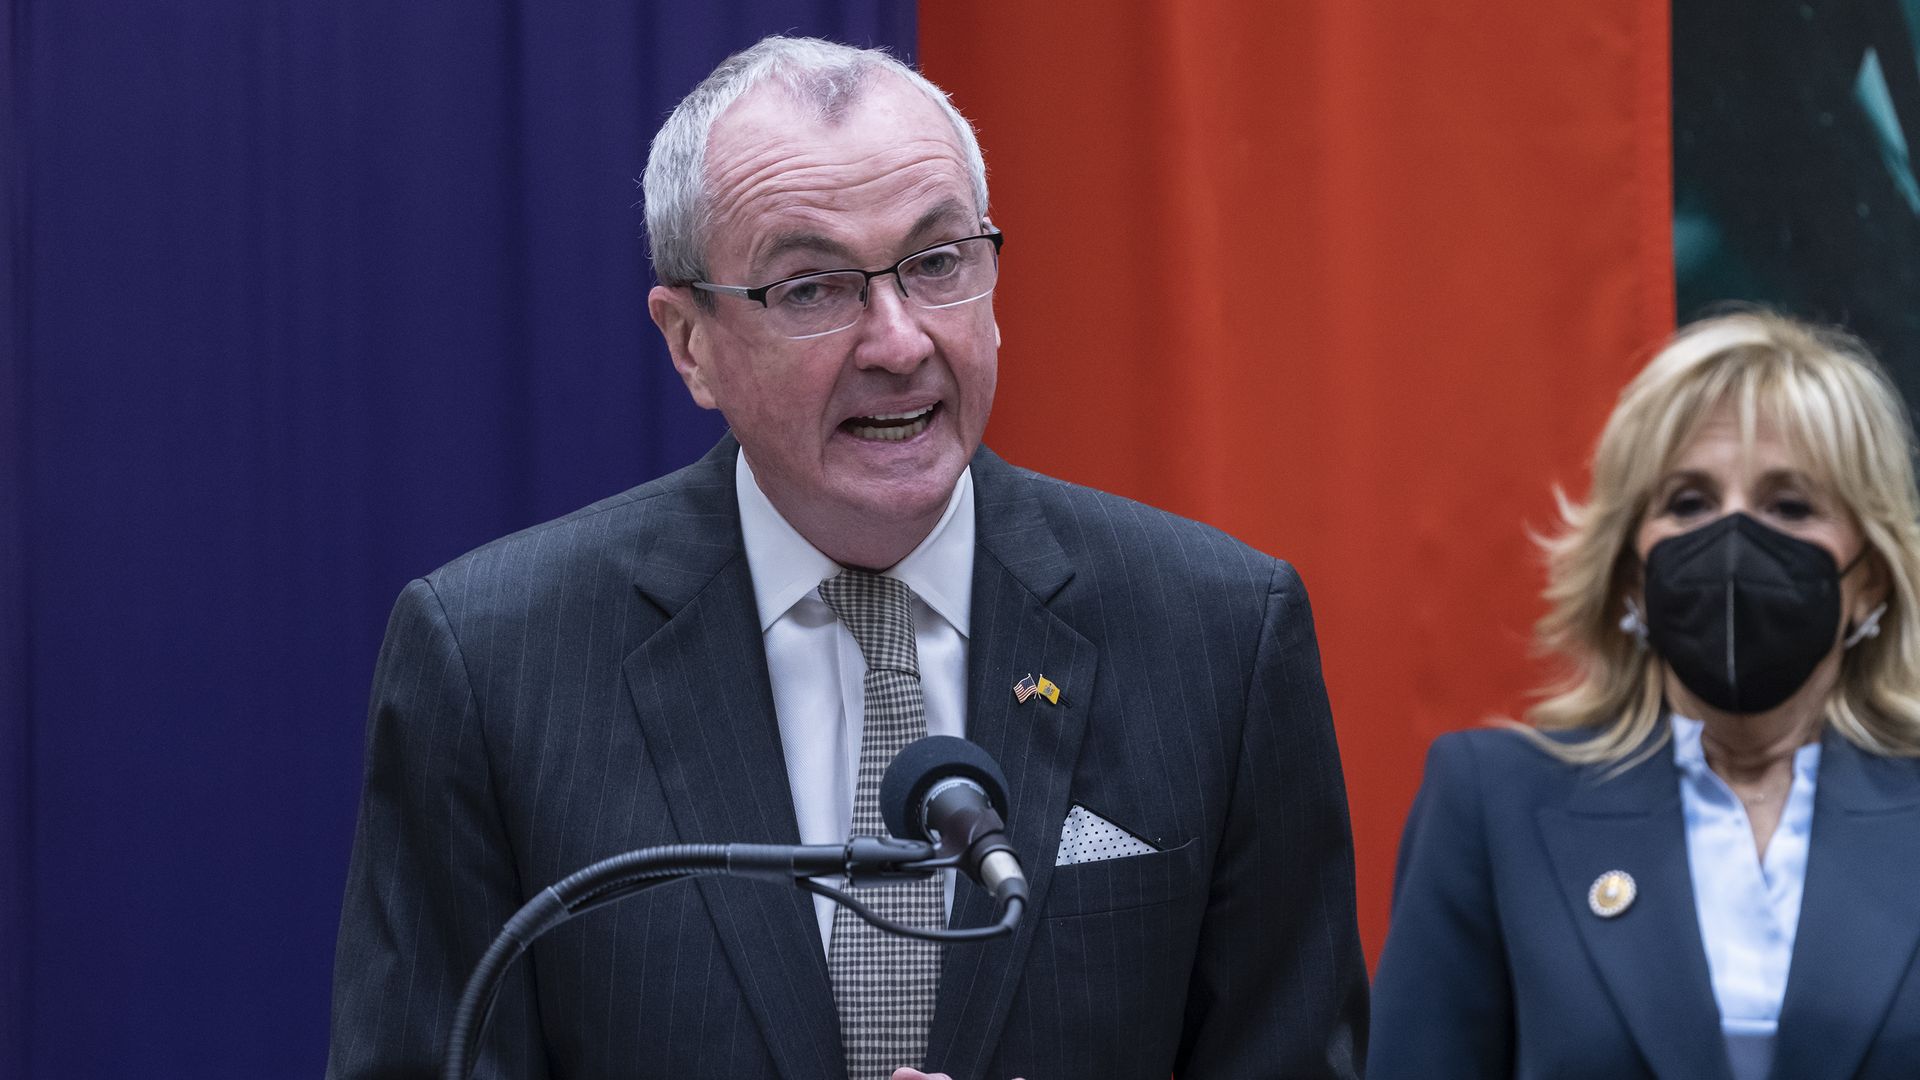 New Jersey Governor Phil Murphy (D) speaking in the city of Paramus in January 2022.